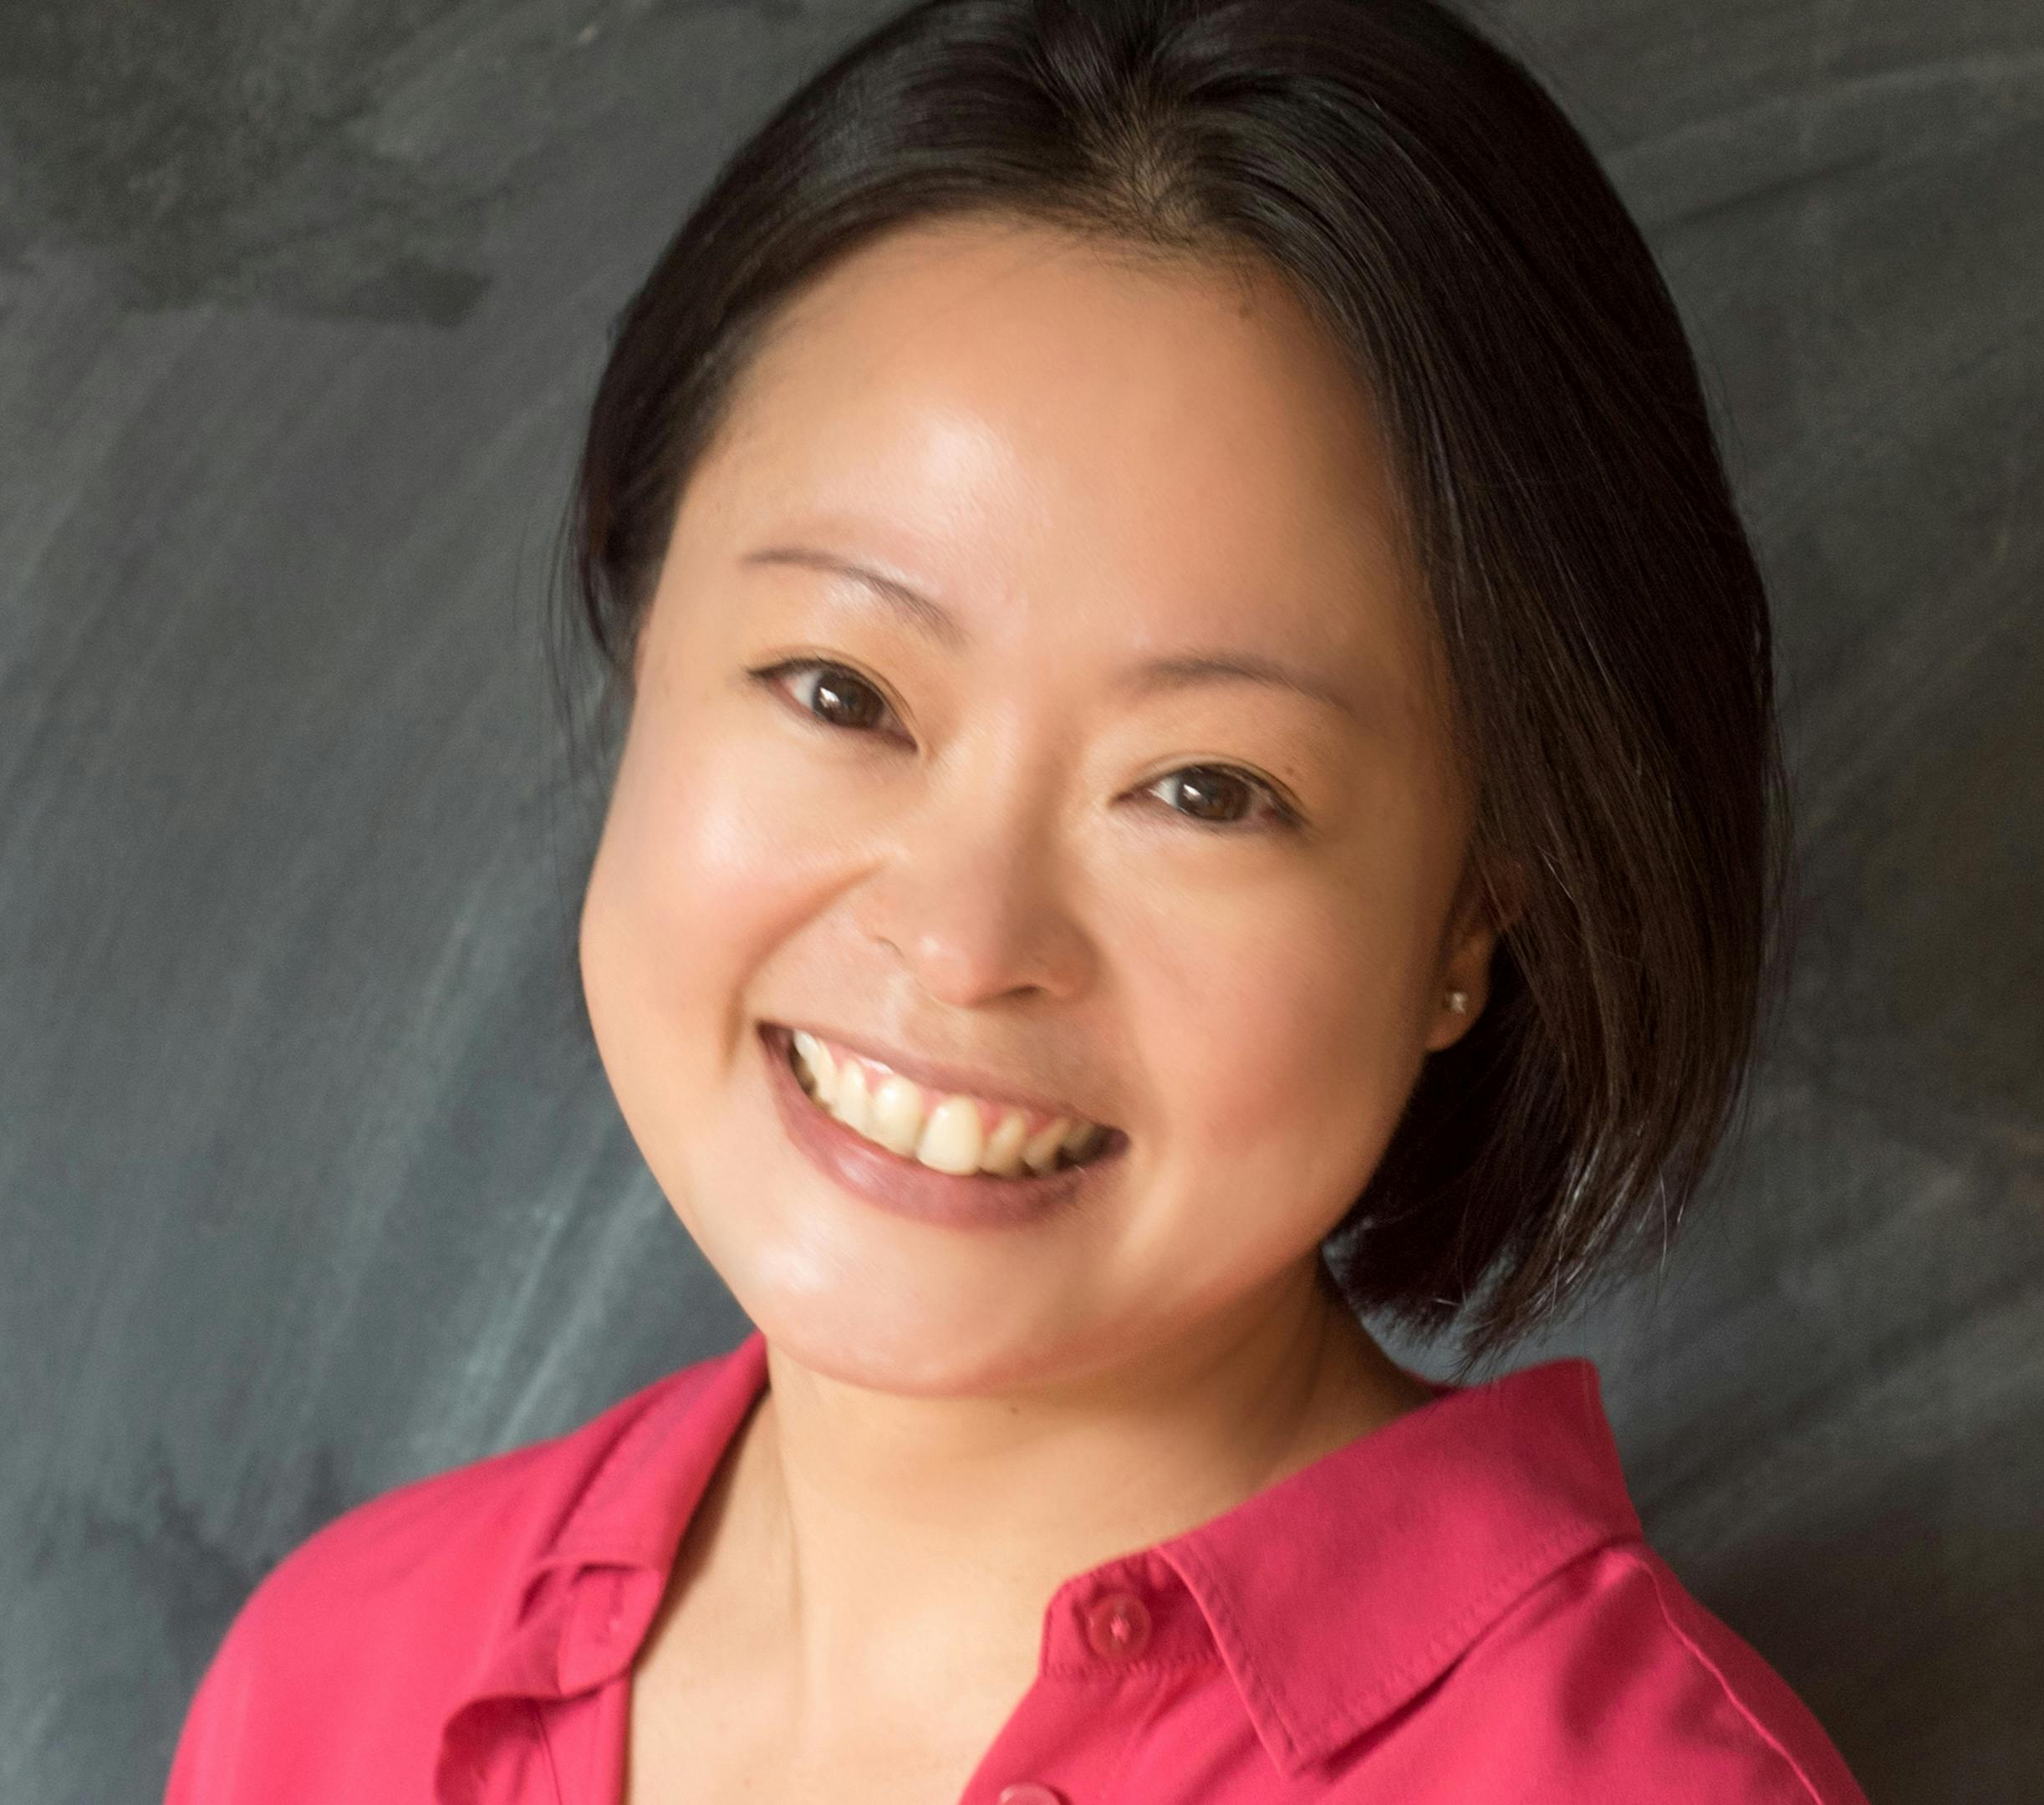 Head and shoulders image of Professor Evelyn Goh. She is smiling and has dark hair